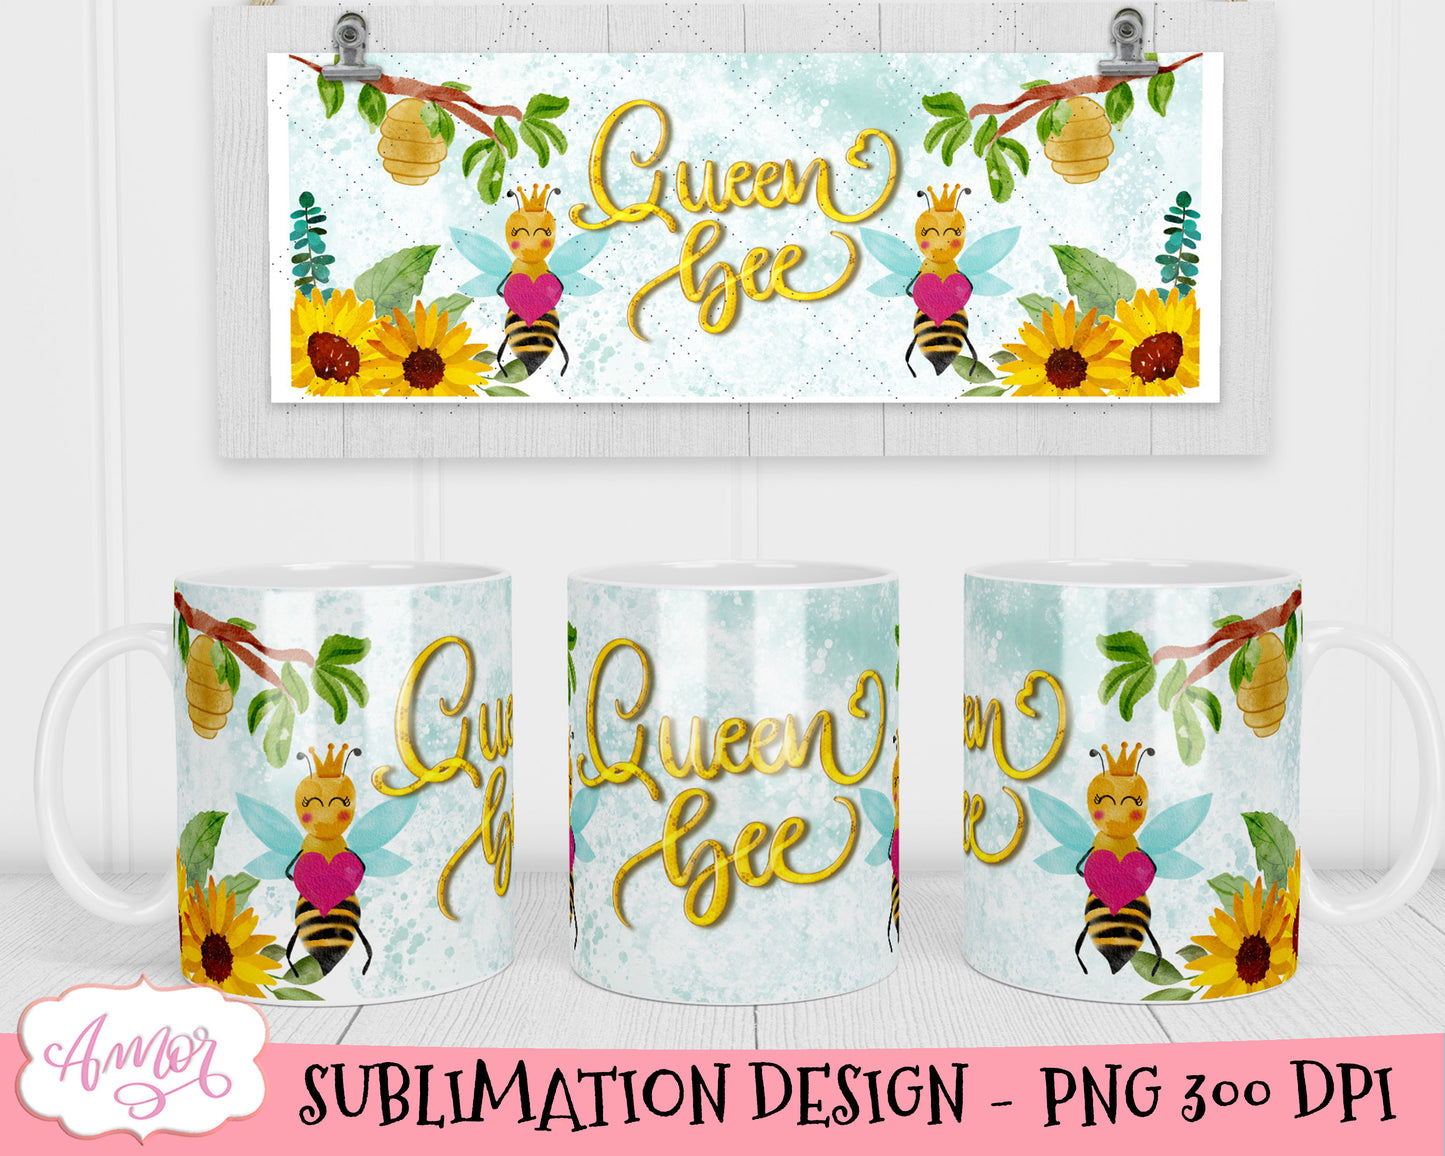 Queen bee mug wrap for sublimation